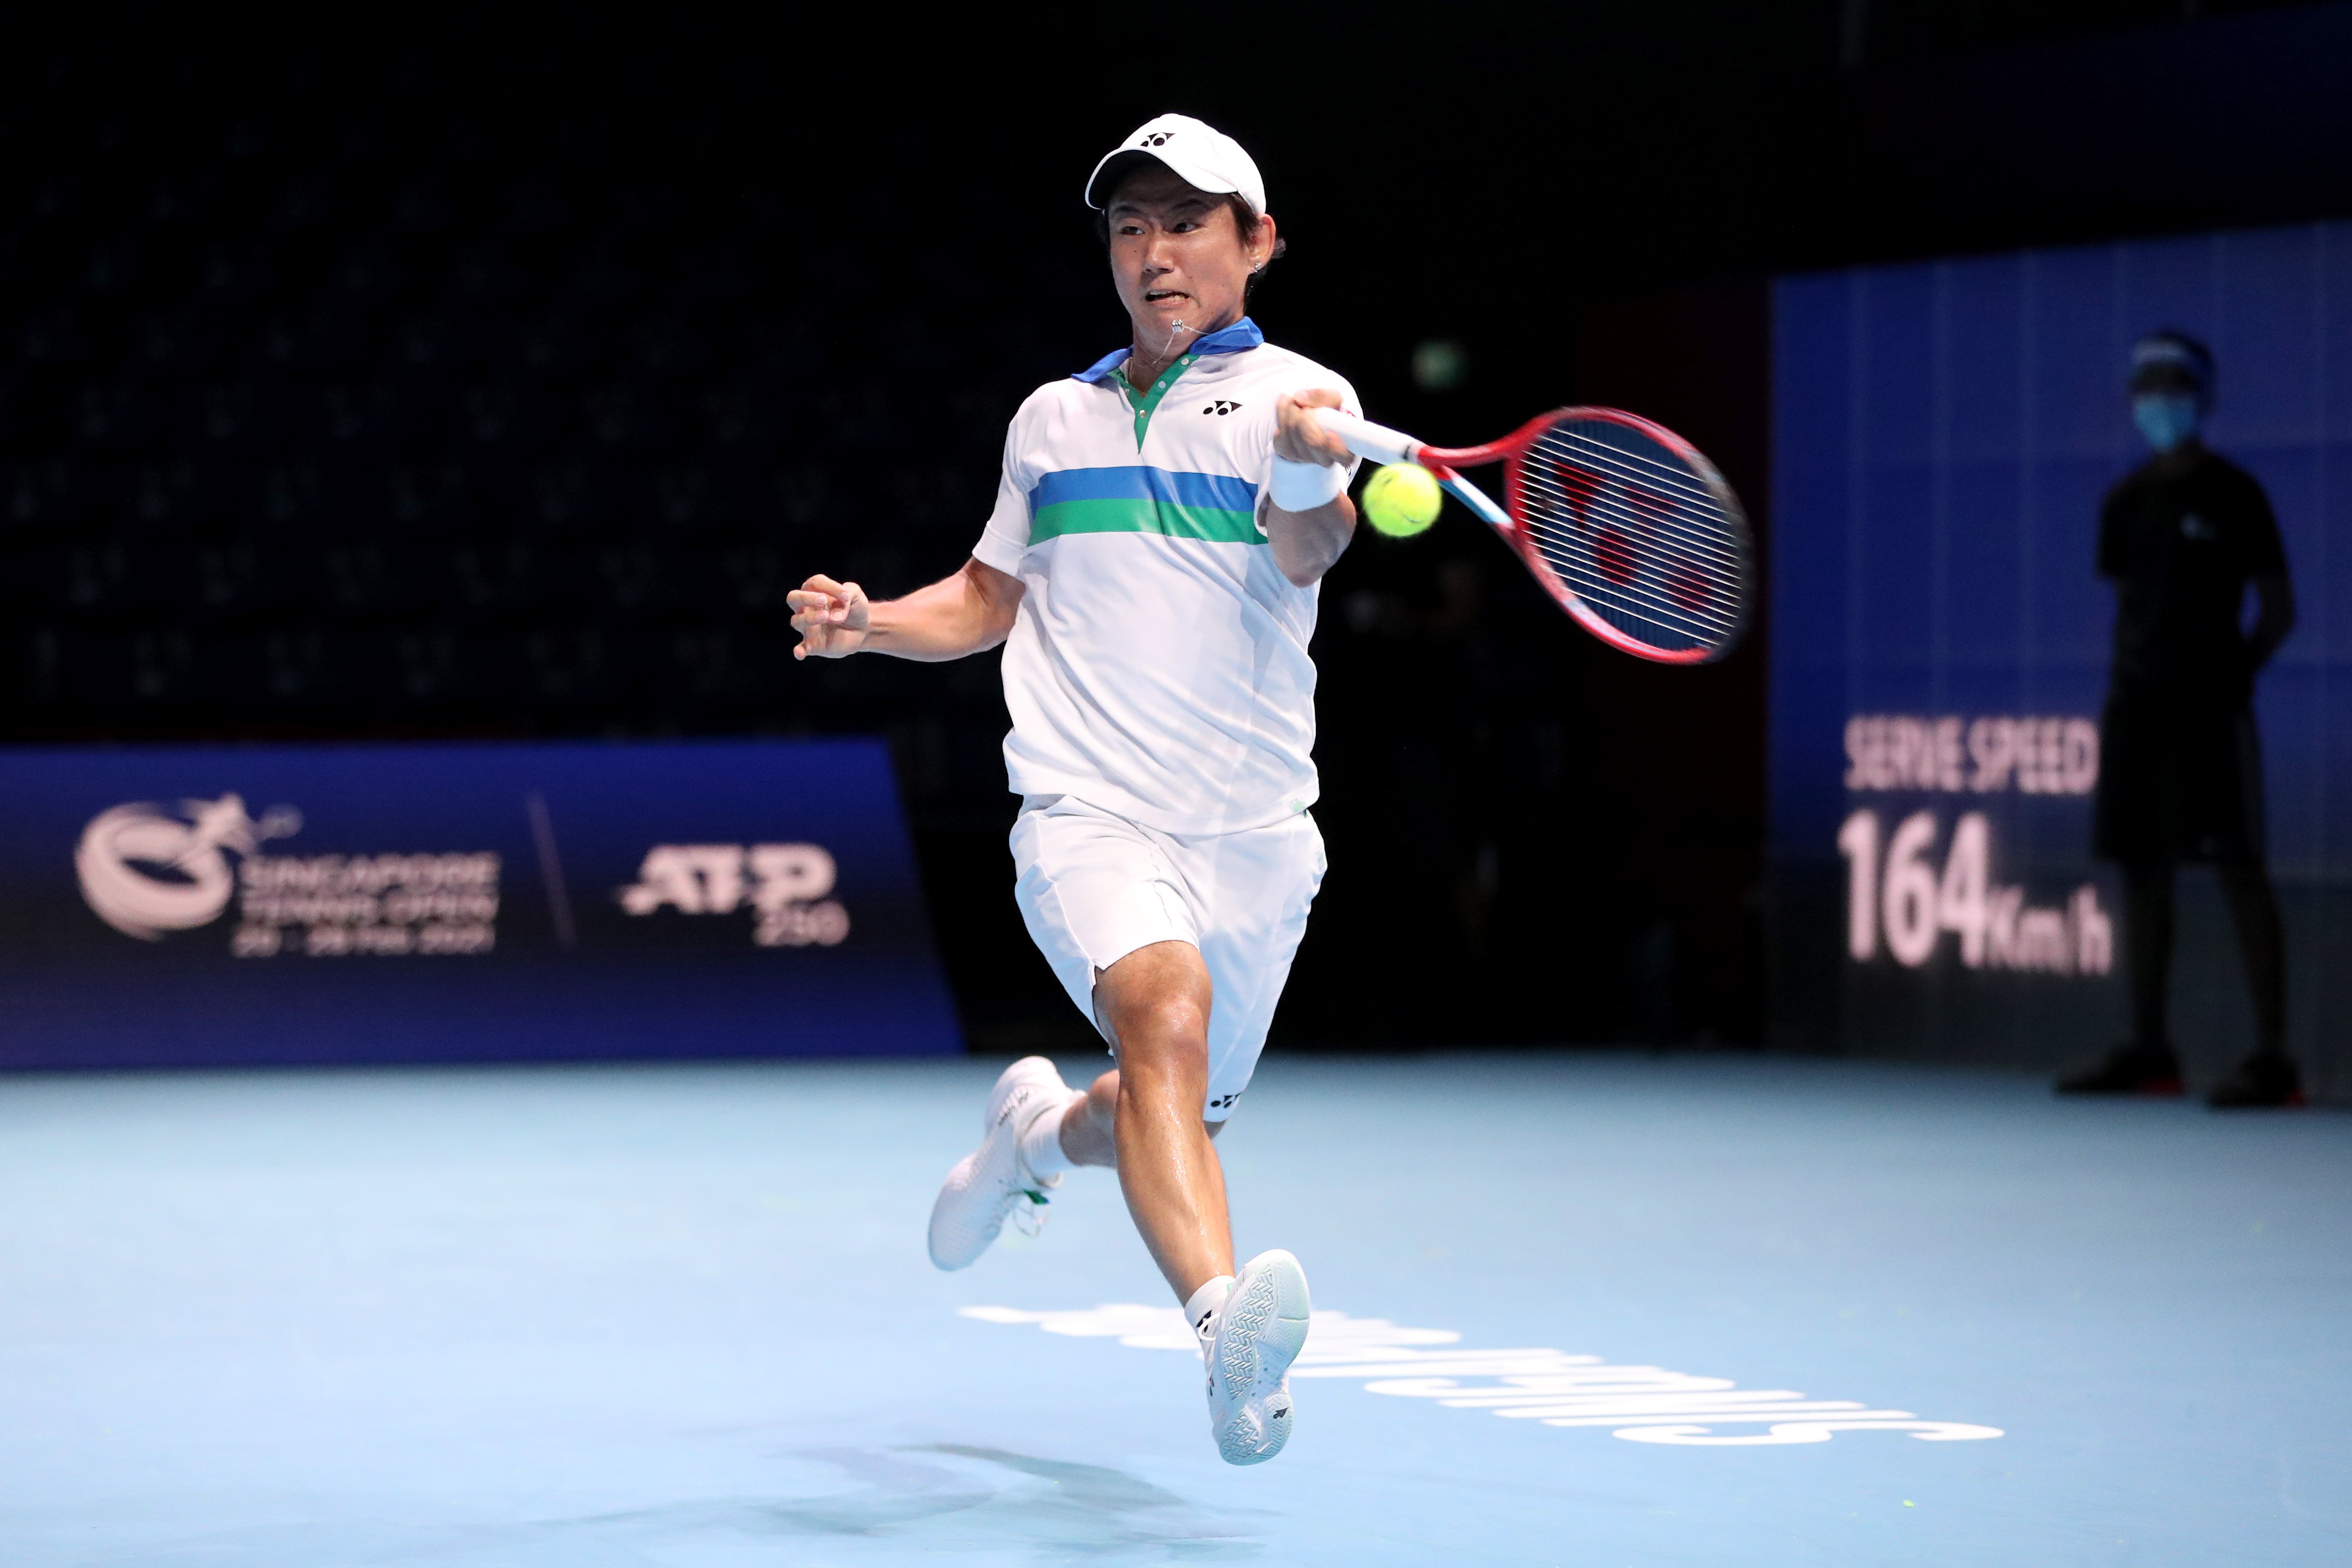 5th seed Nishioka survives strong American challenge to reach STO Rd of 16